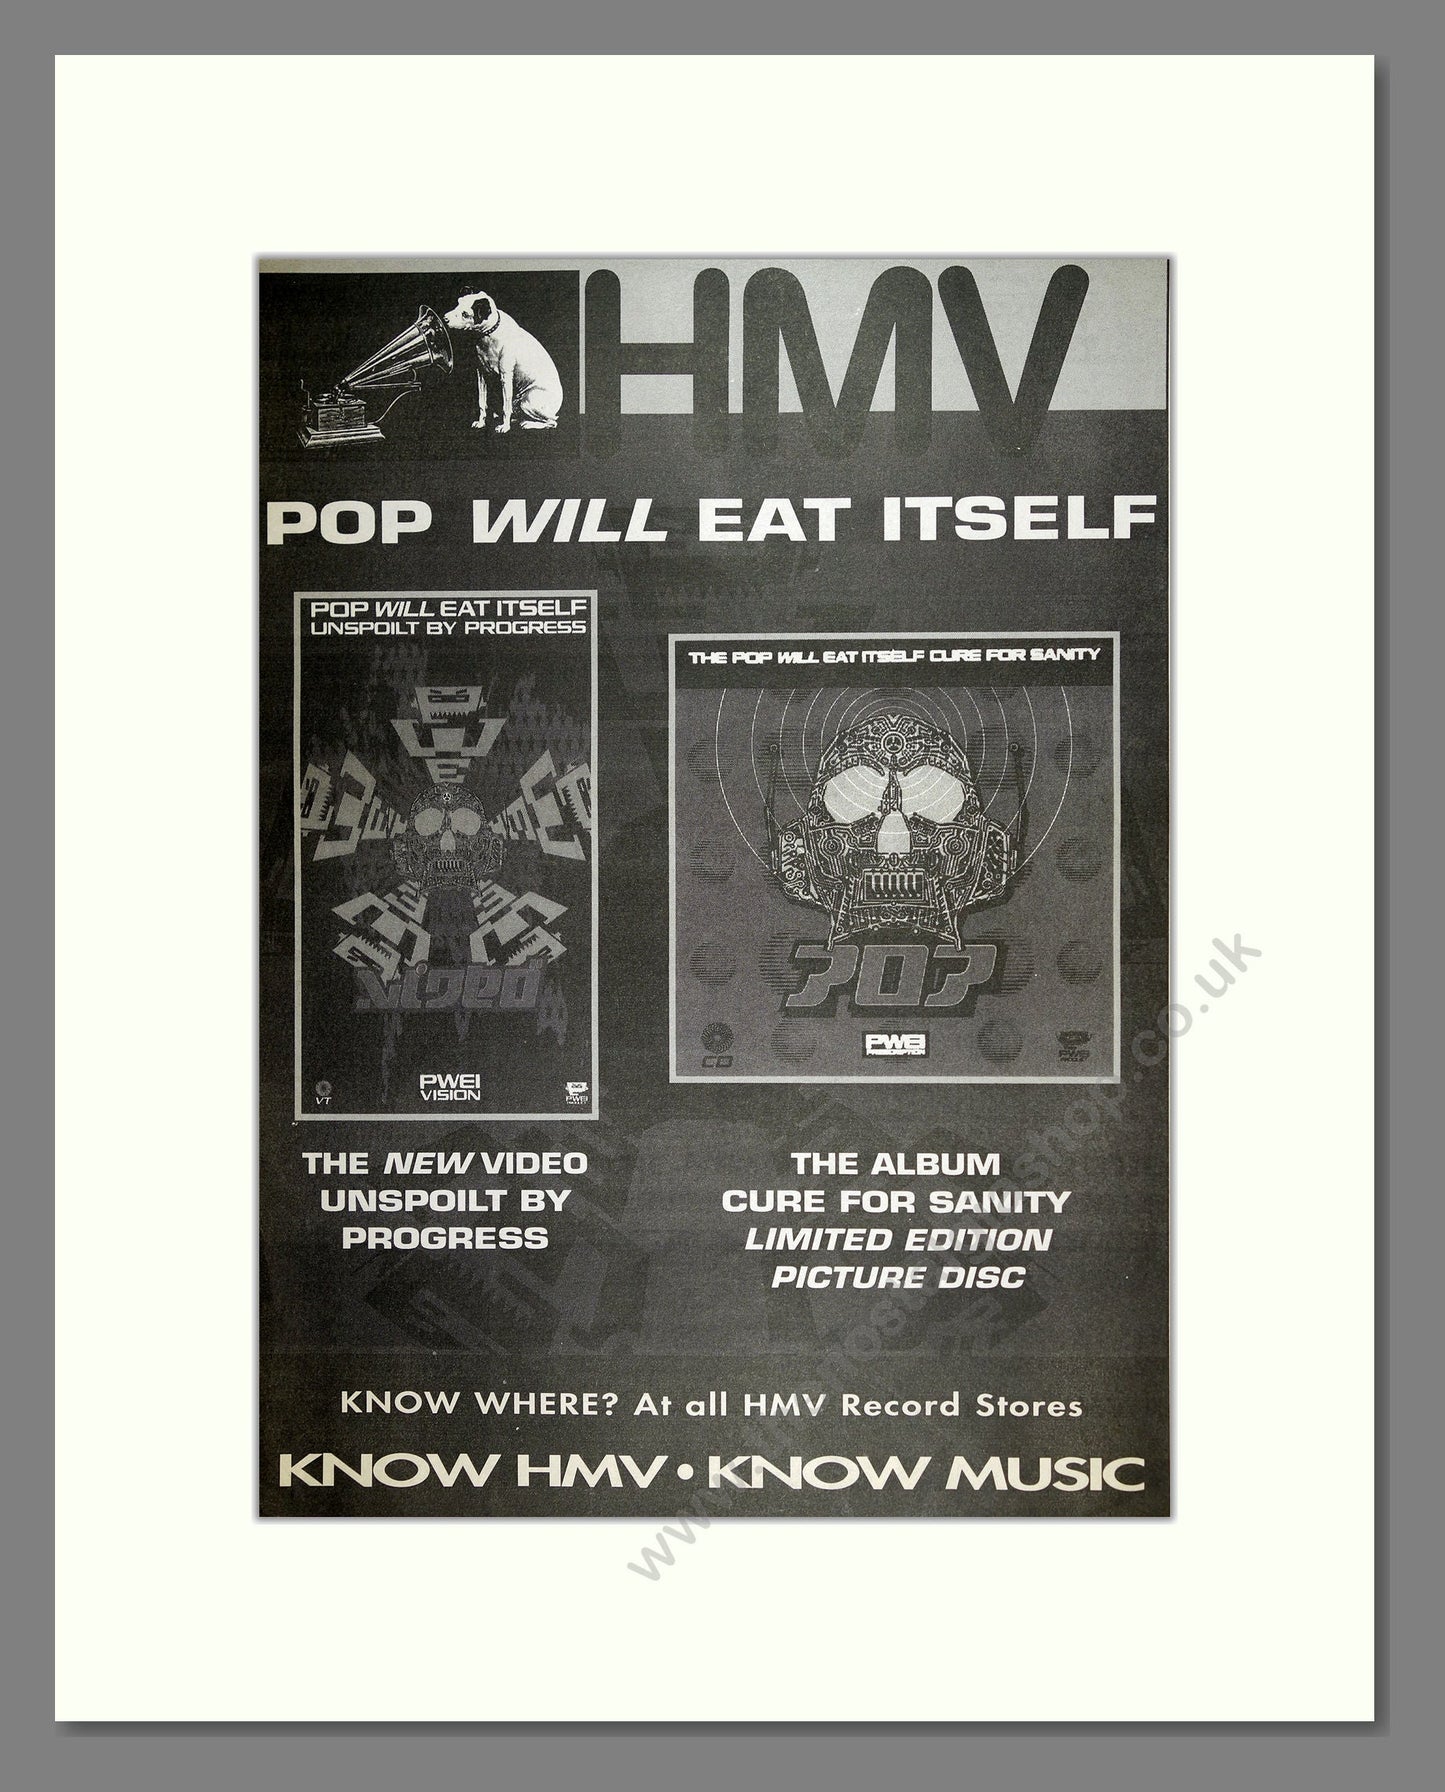 Pop Will Eat Itself - Cure for Sanity. Vintage Advert 1991 (ref AD16516)